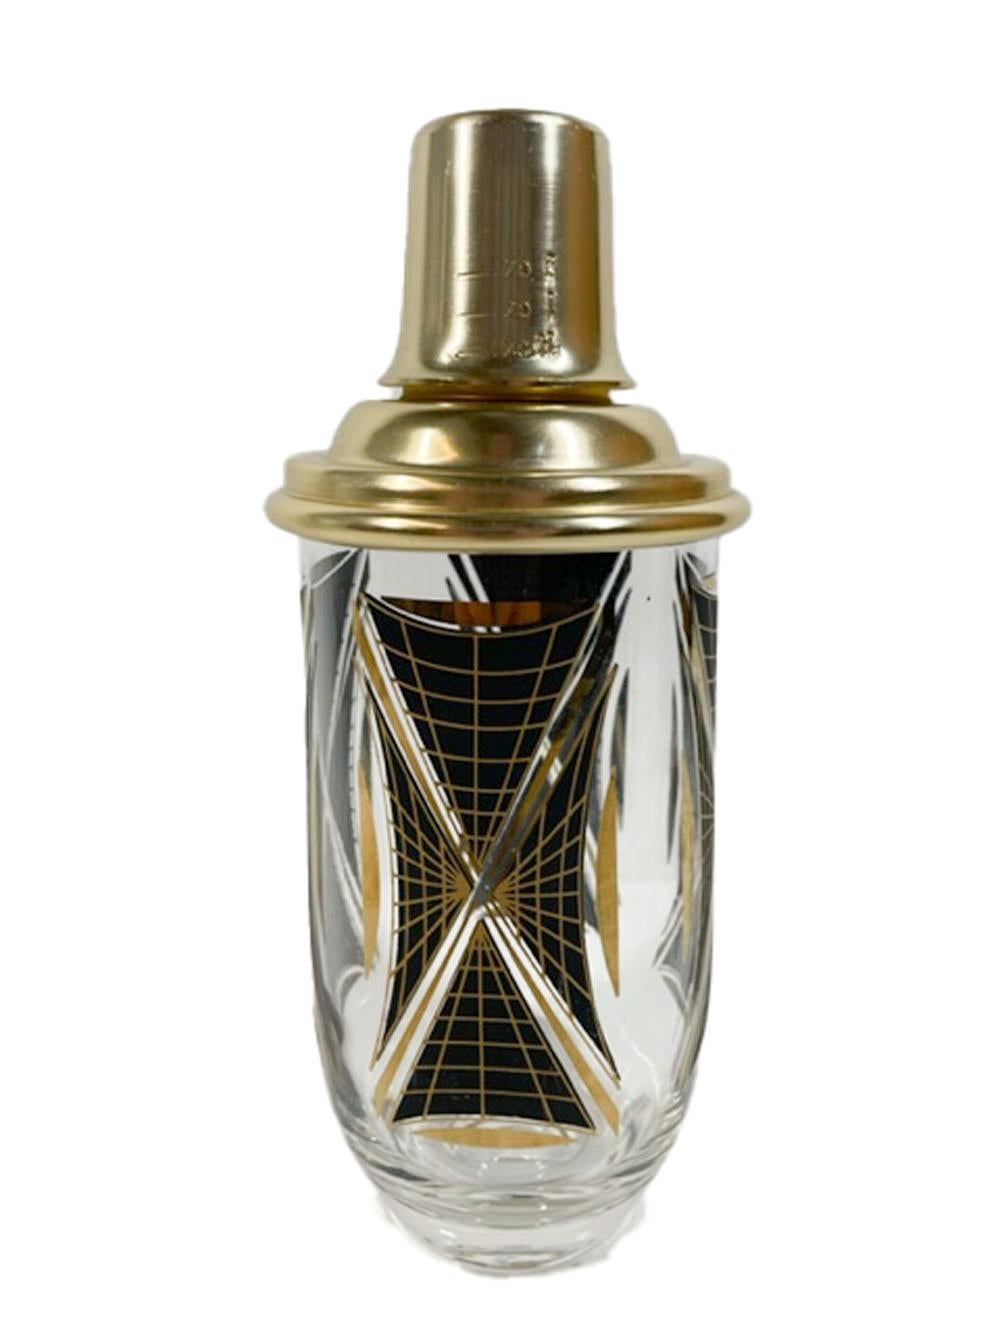 Mid-Century Modern Vintage Atomic Period Cocktail Shaker with Black and Gold Decoration